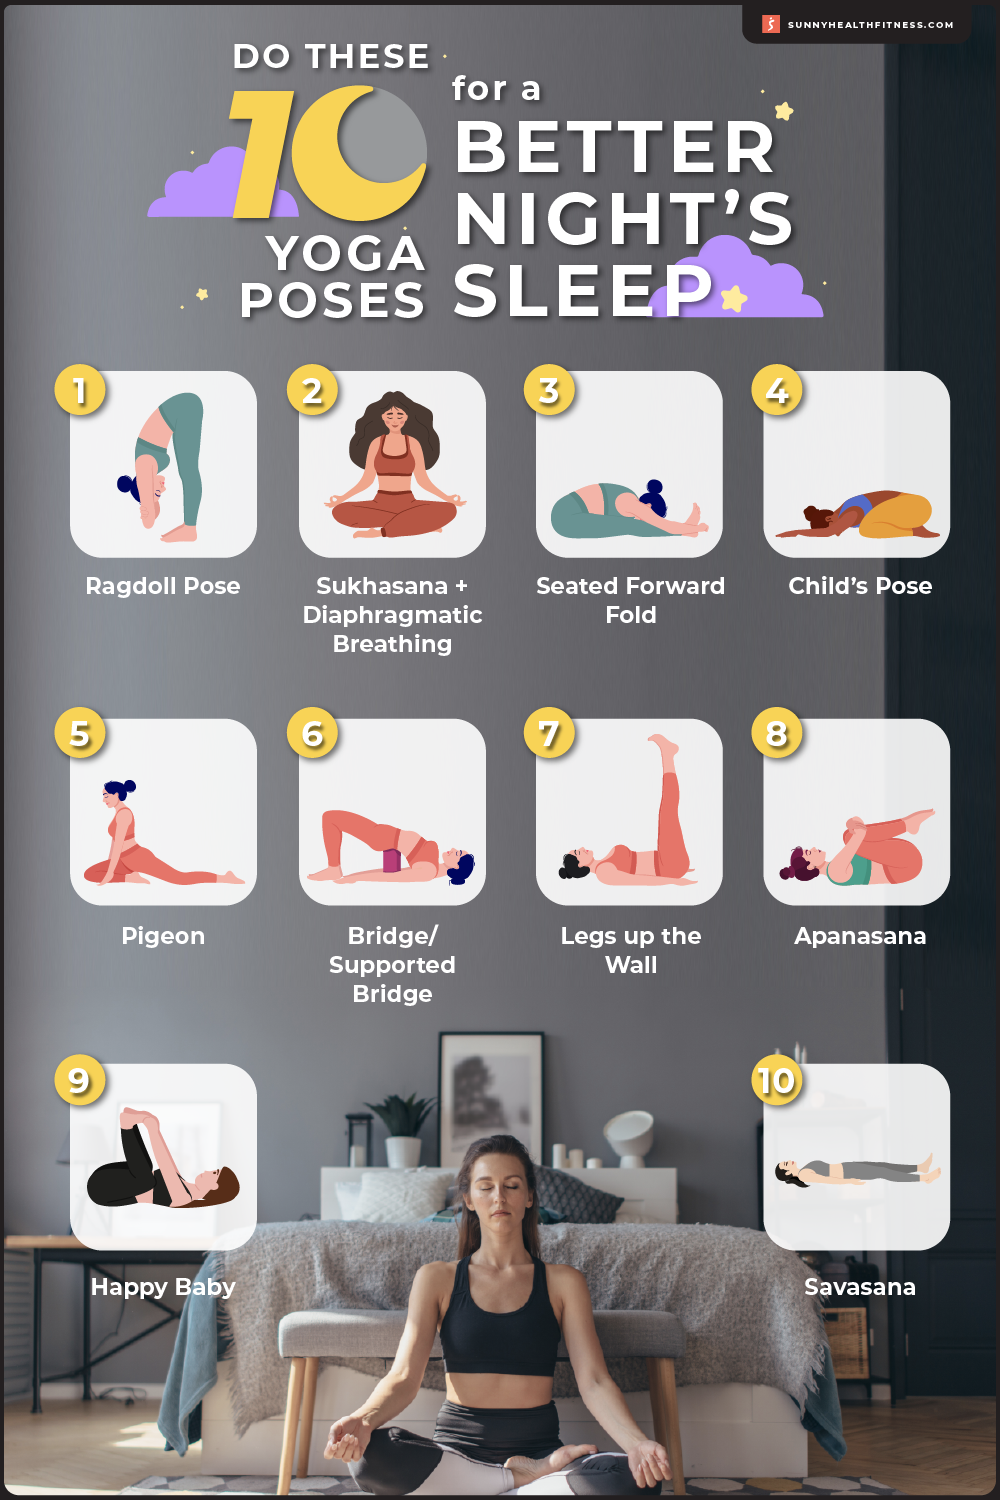 Yoga poses you should give a try before bedtime for better sleep. :  r/flexibility